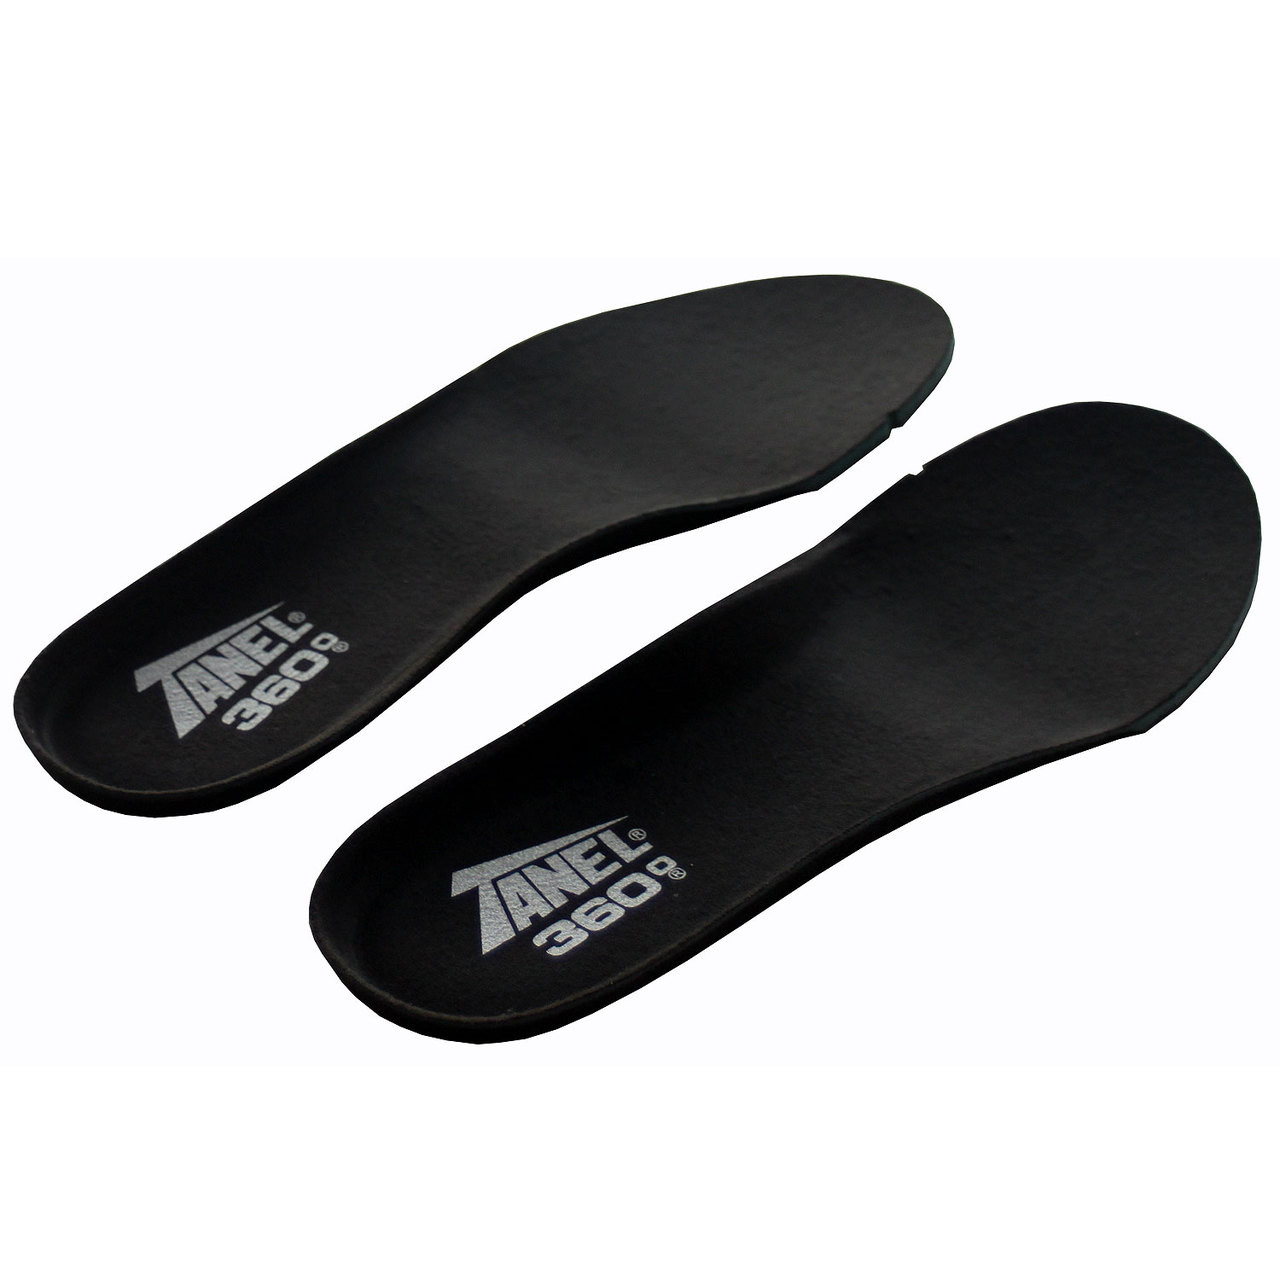 Tanel 360 High Tech Ortholite Insoles - Tanel360.com